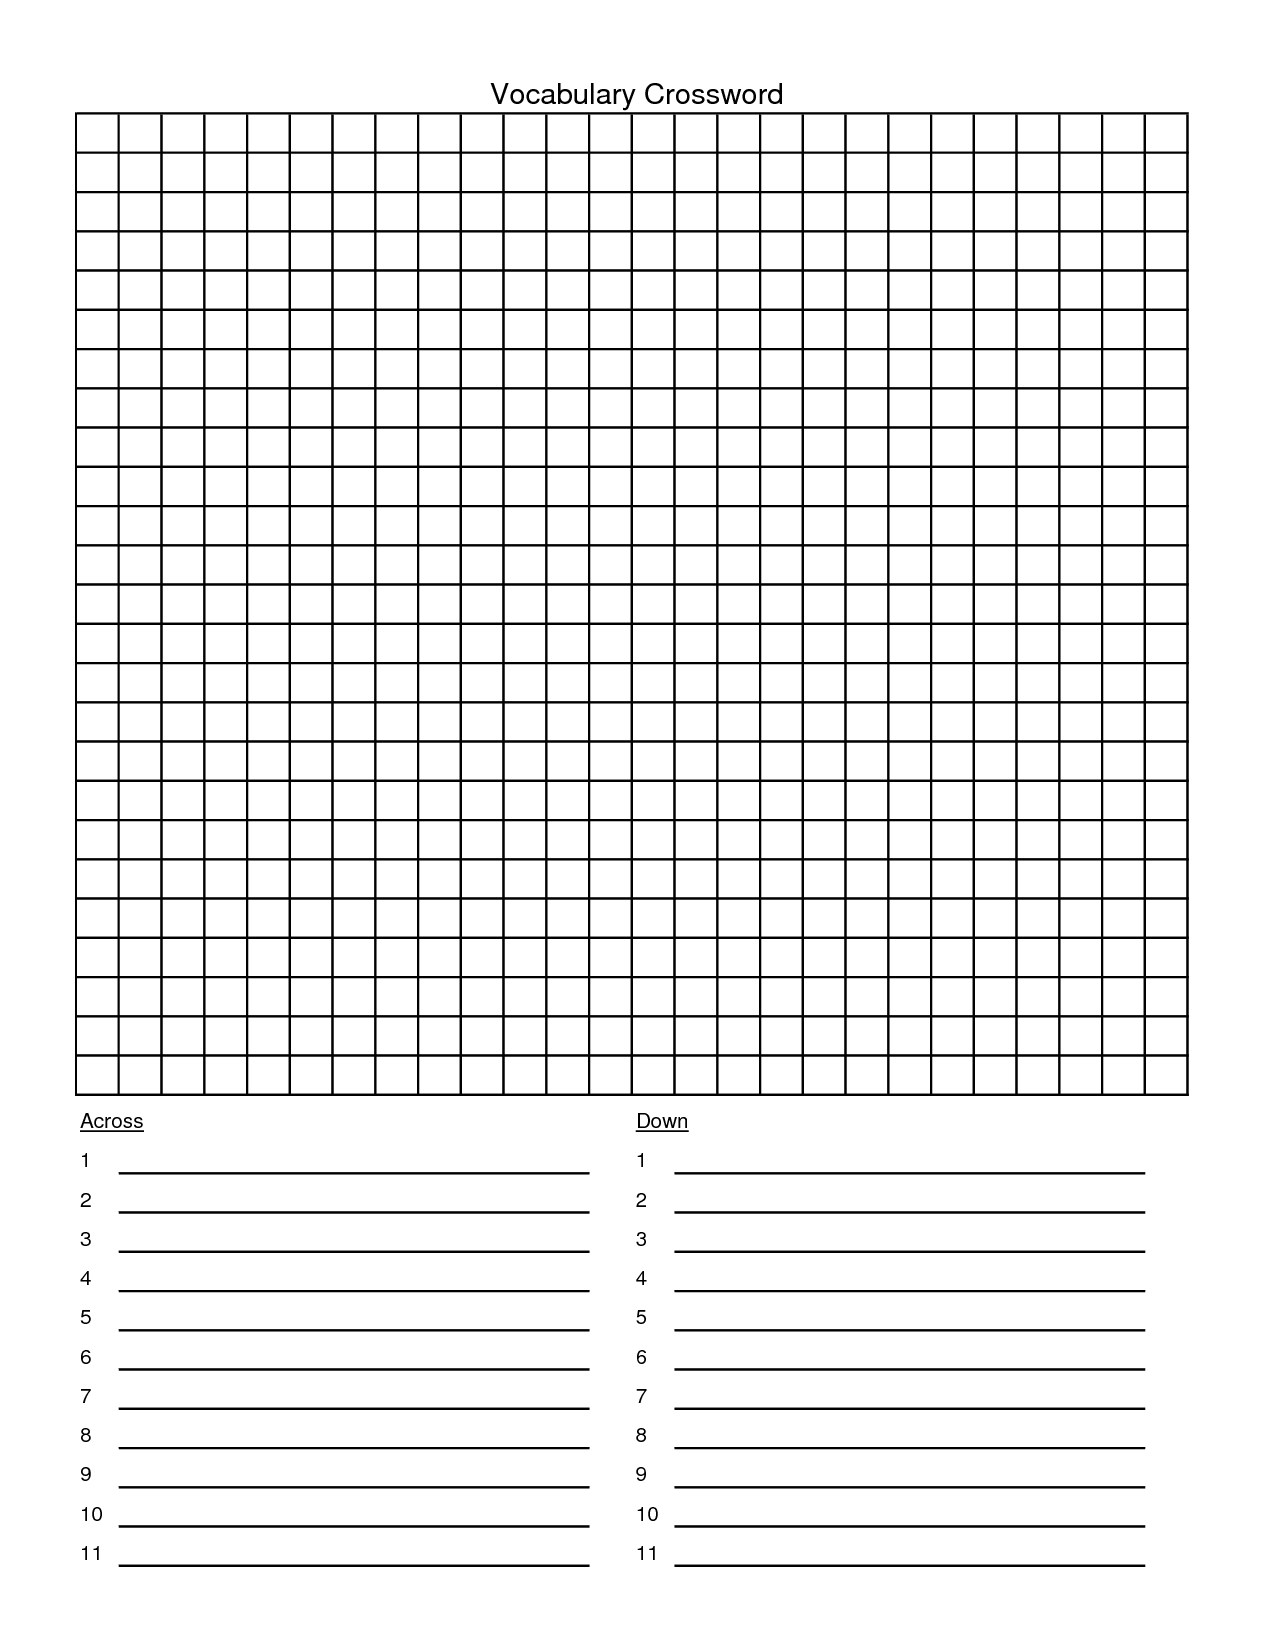 Template For Crossword Puzzle. Crossword Template Daily Dose Of - Blank Crossword Puzzle Grids Printable